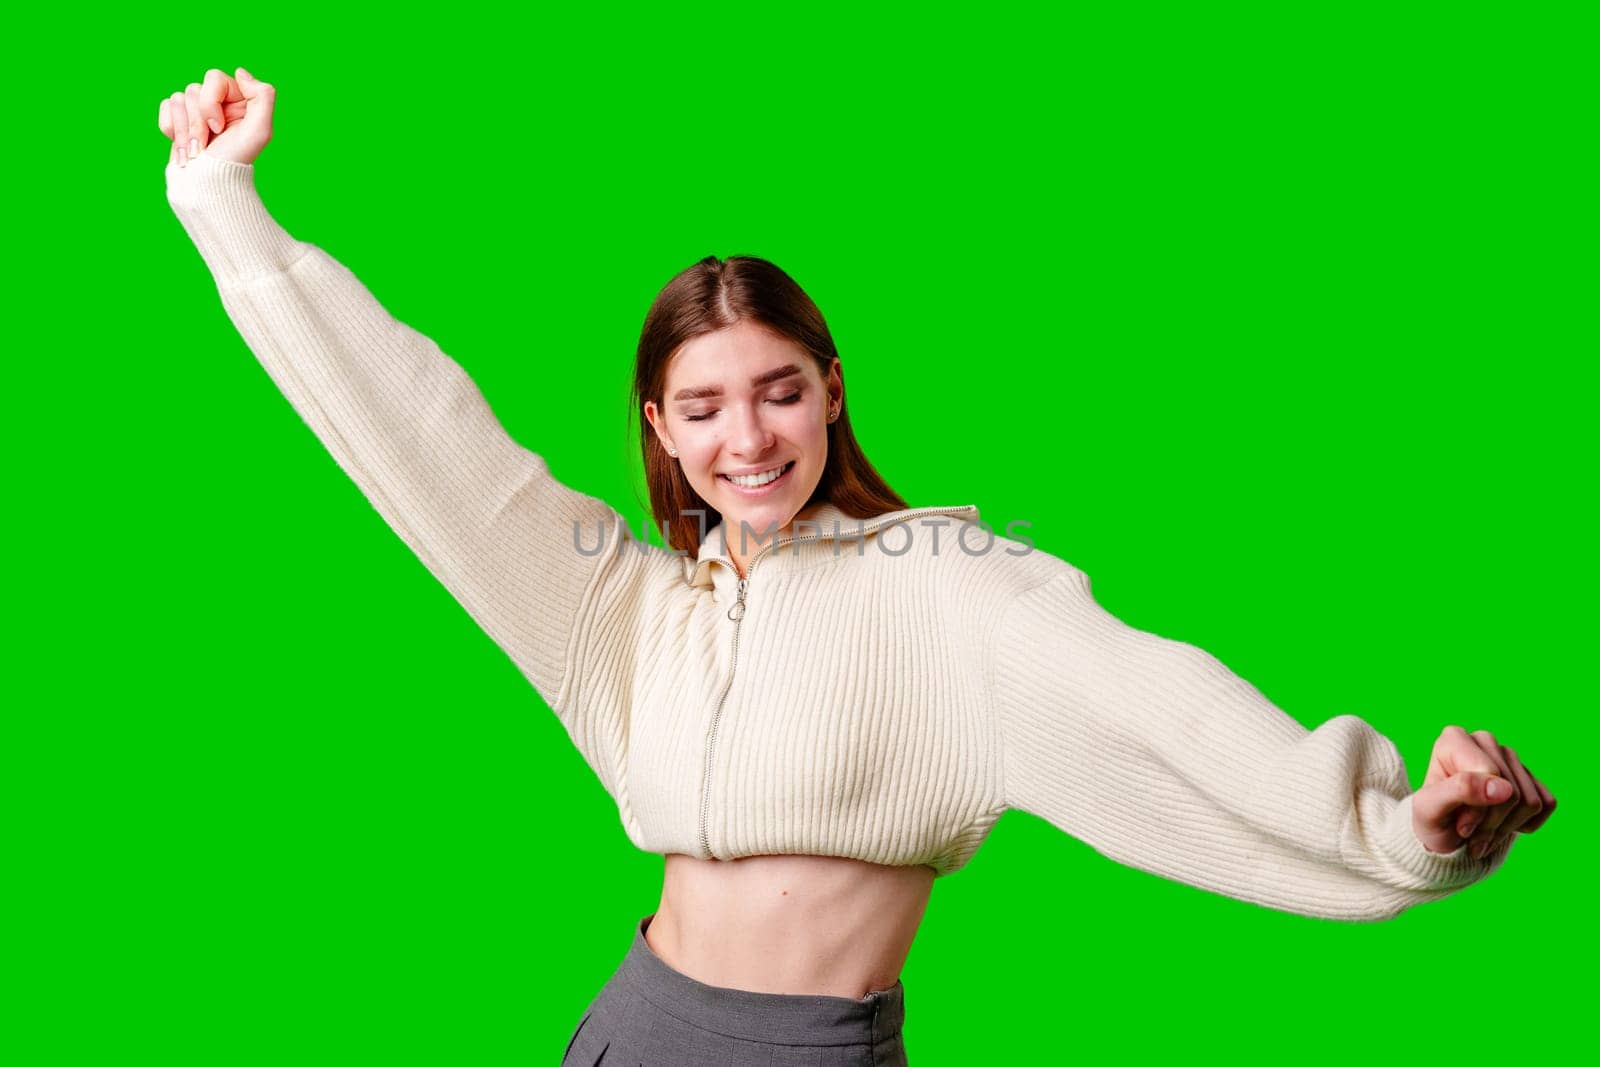 A young woman is captured in a moment of jubilation, her arms raised in victory and a beaming smile on her face, set against a vivid green background which indicates the use of a green screen for post-production editing.